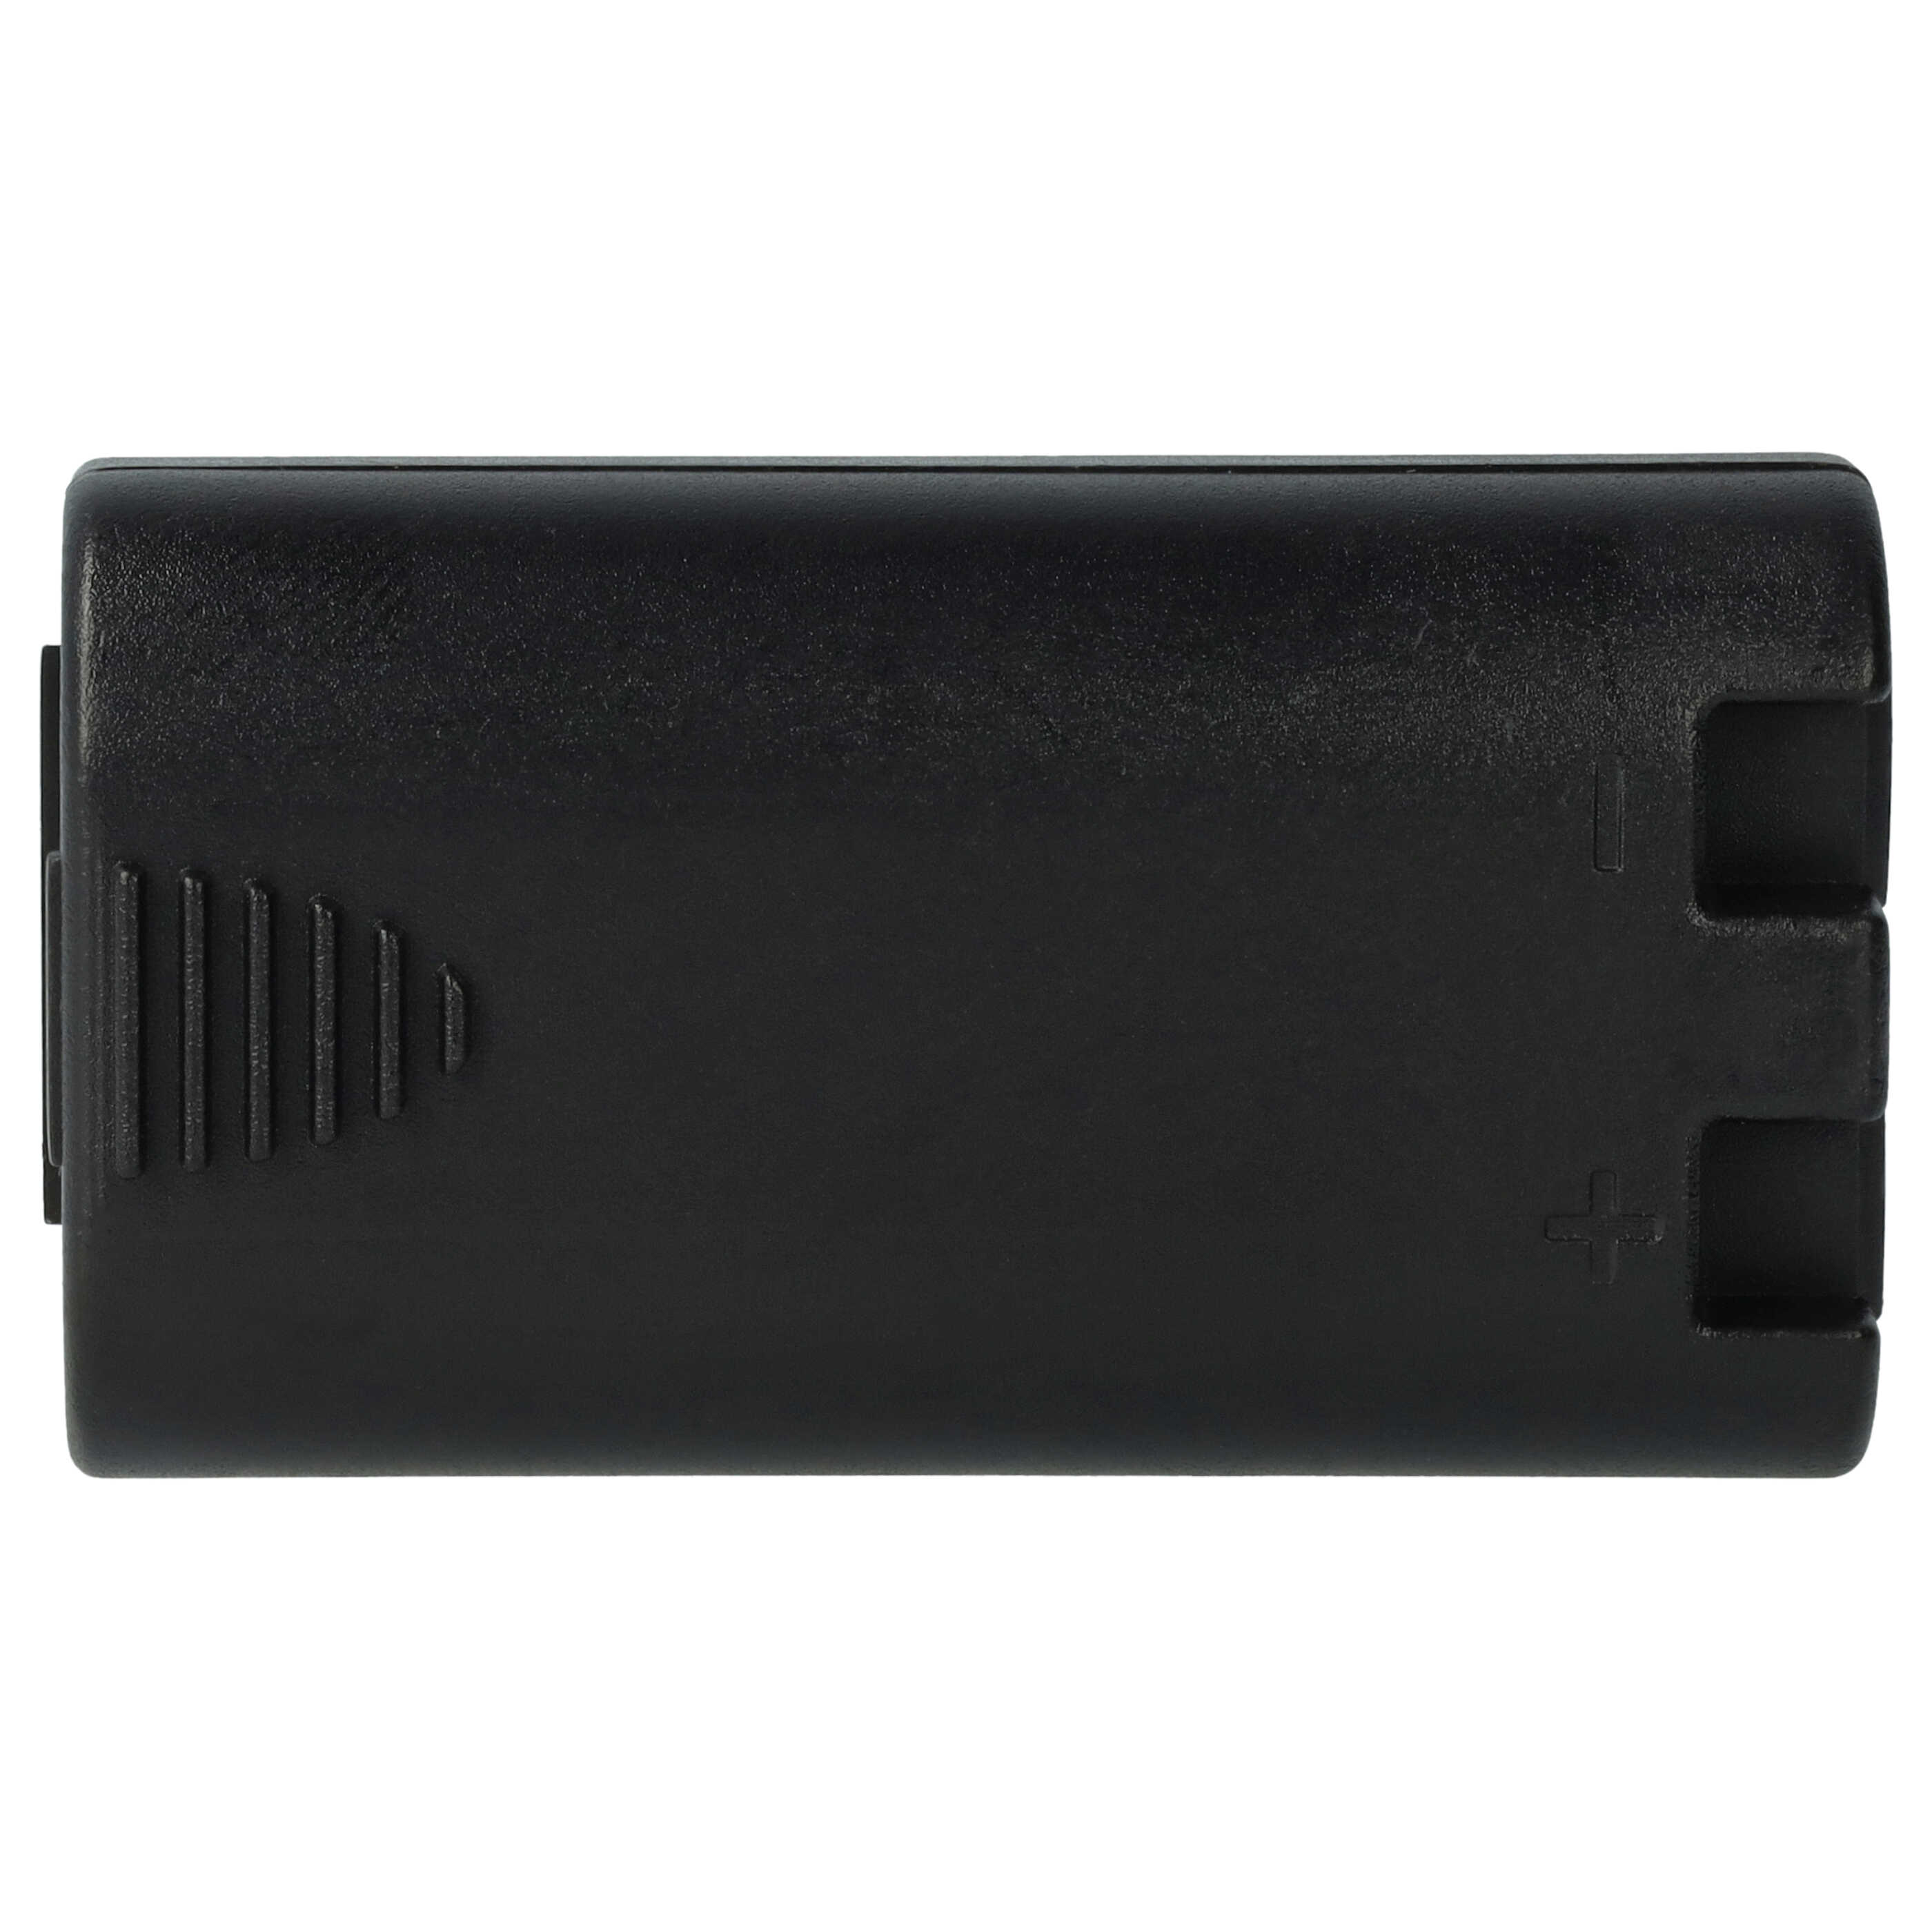 Printer Battery Replacement for 3M W003688, S0895880 - 800mAh 7.4V Li-Ion